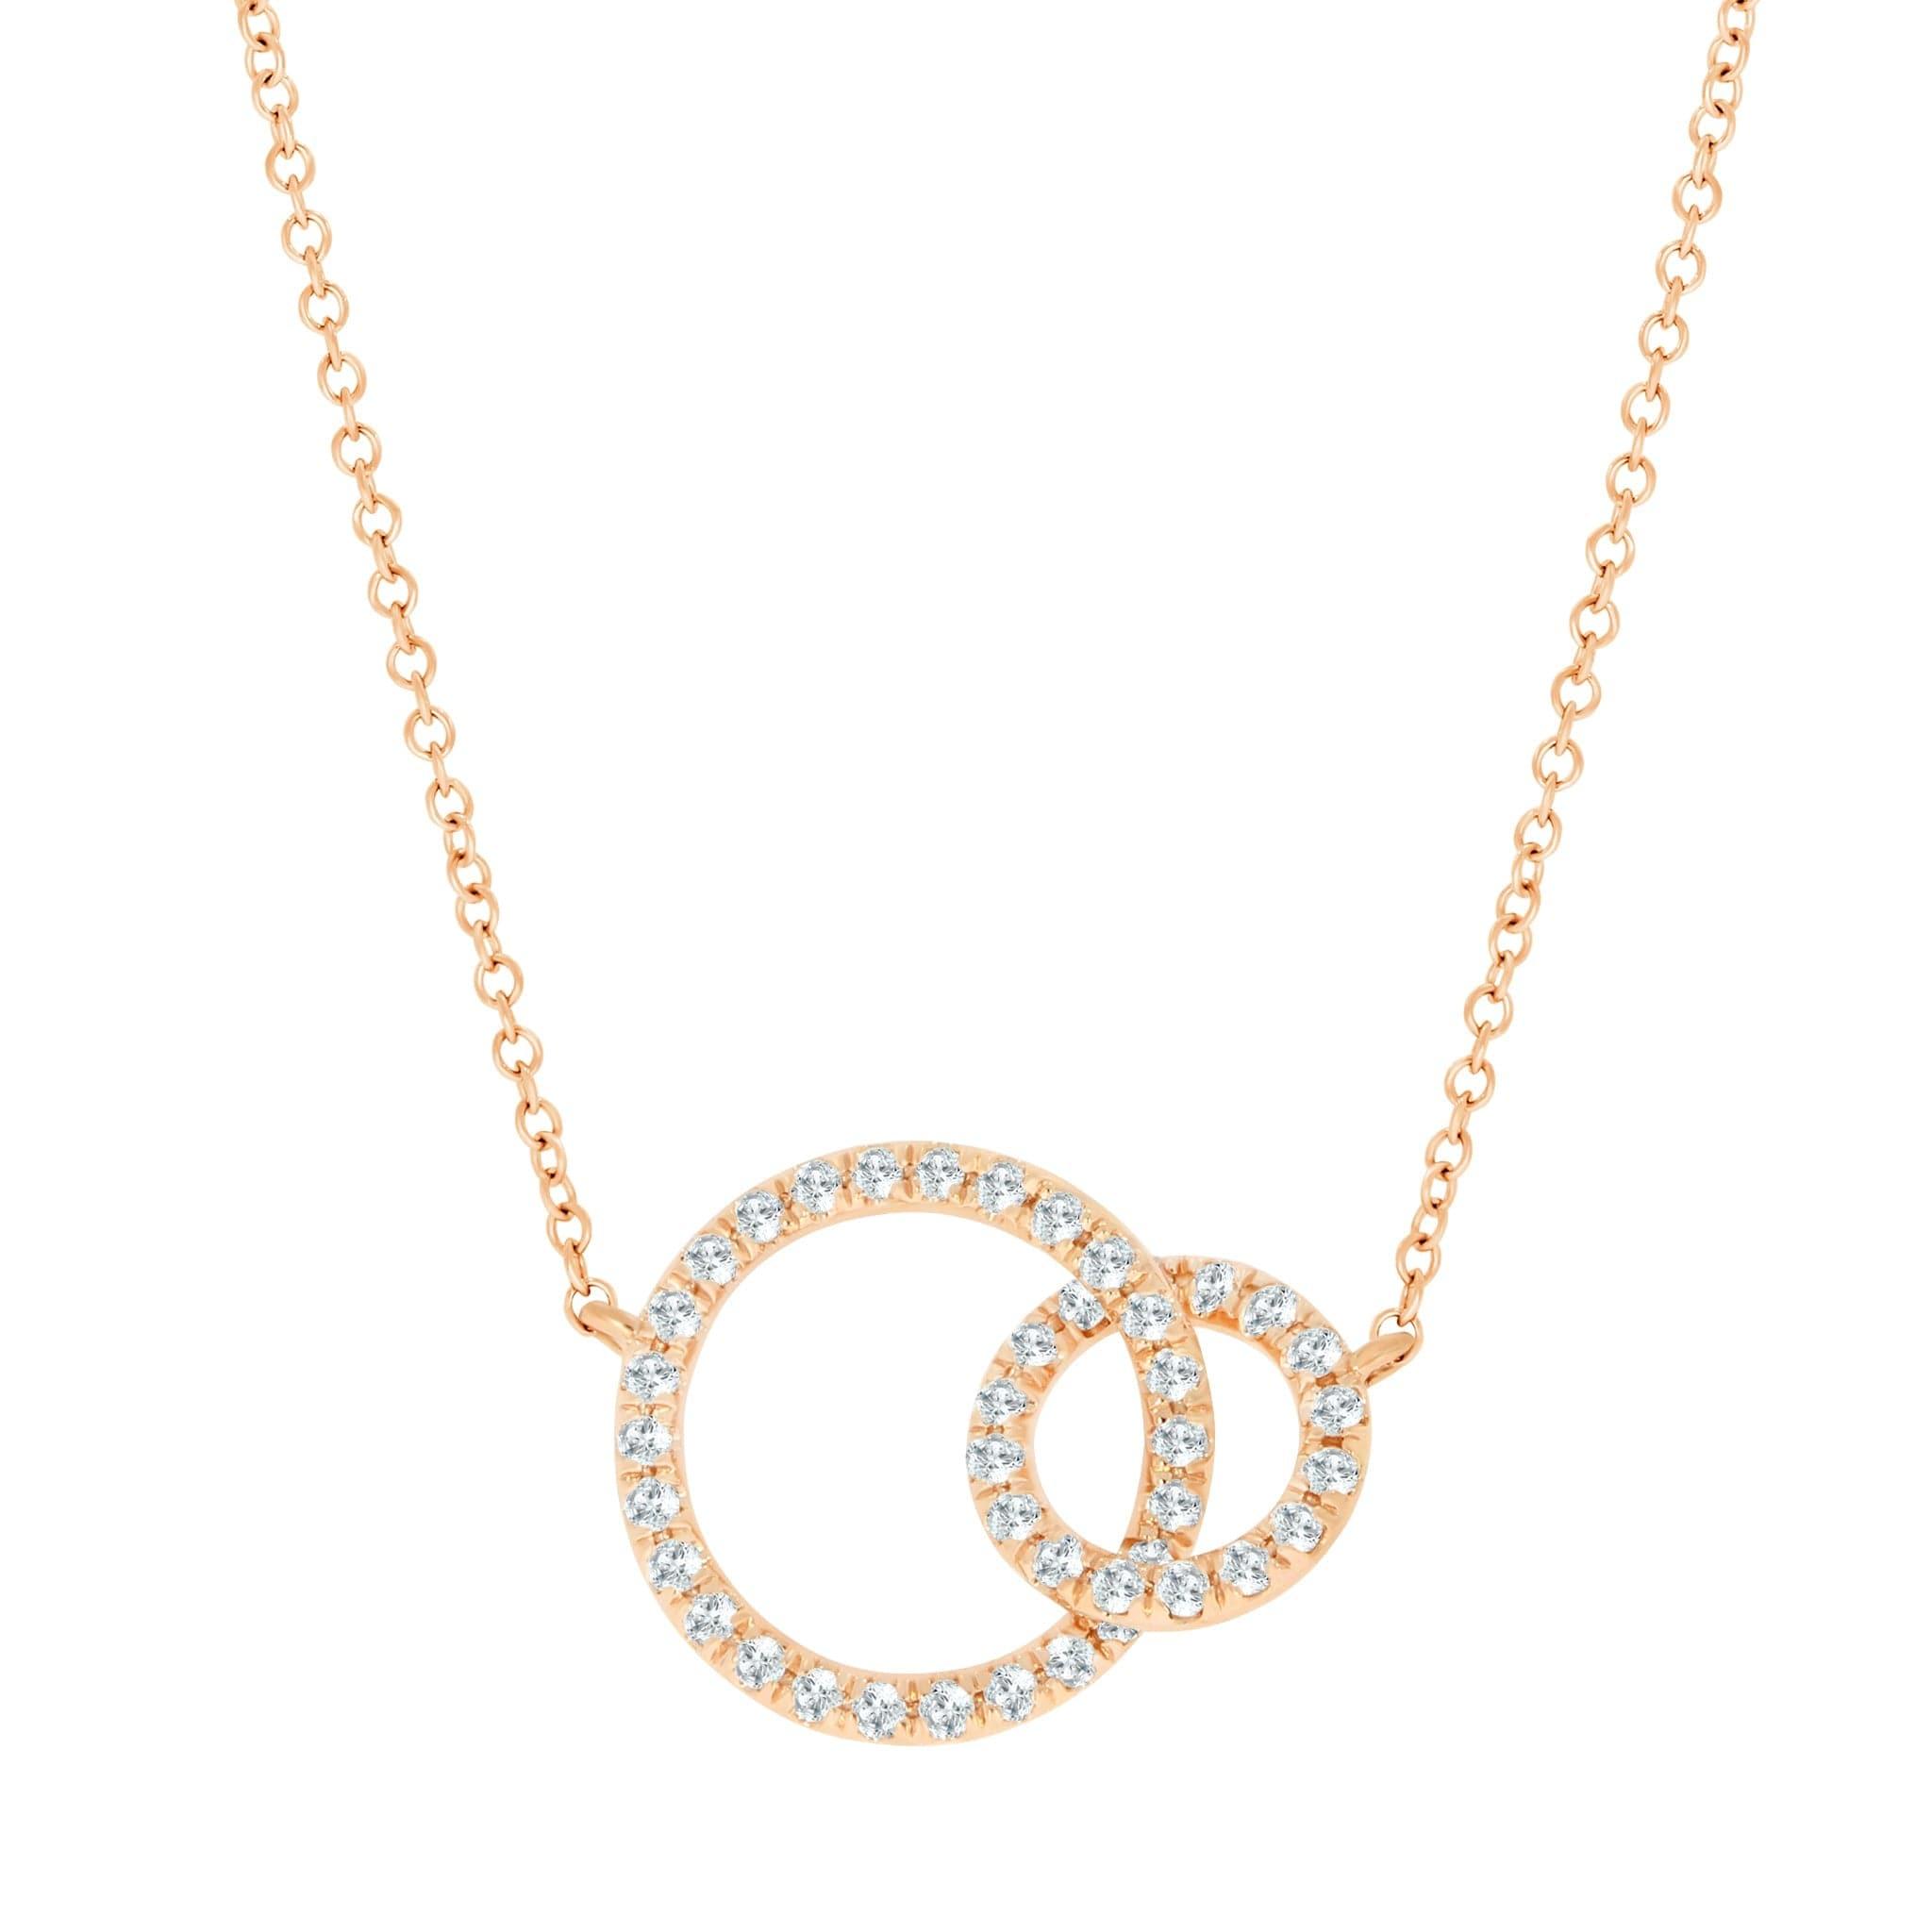 Simple Geometric Beads Pendant Gold Chain Necklace For Women Gold-Plat